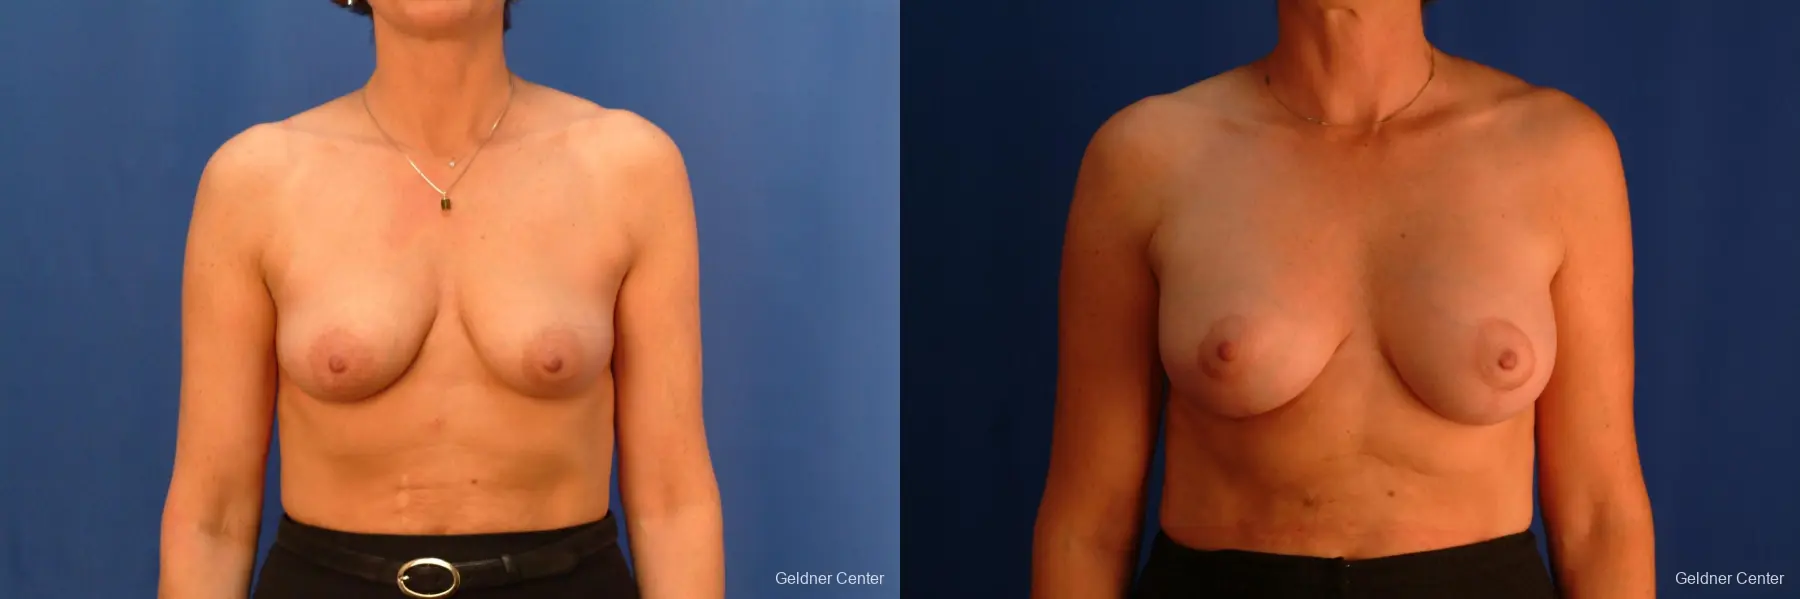 Breast Augmentation Streeterville, Chicago 2508 - Before and After 1